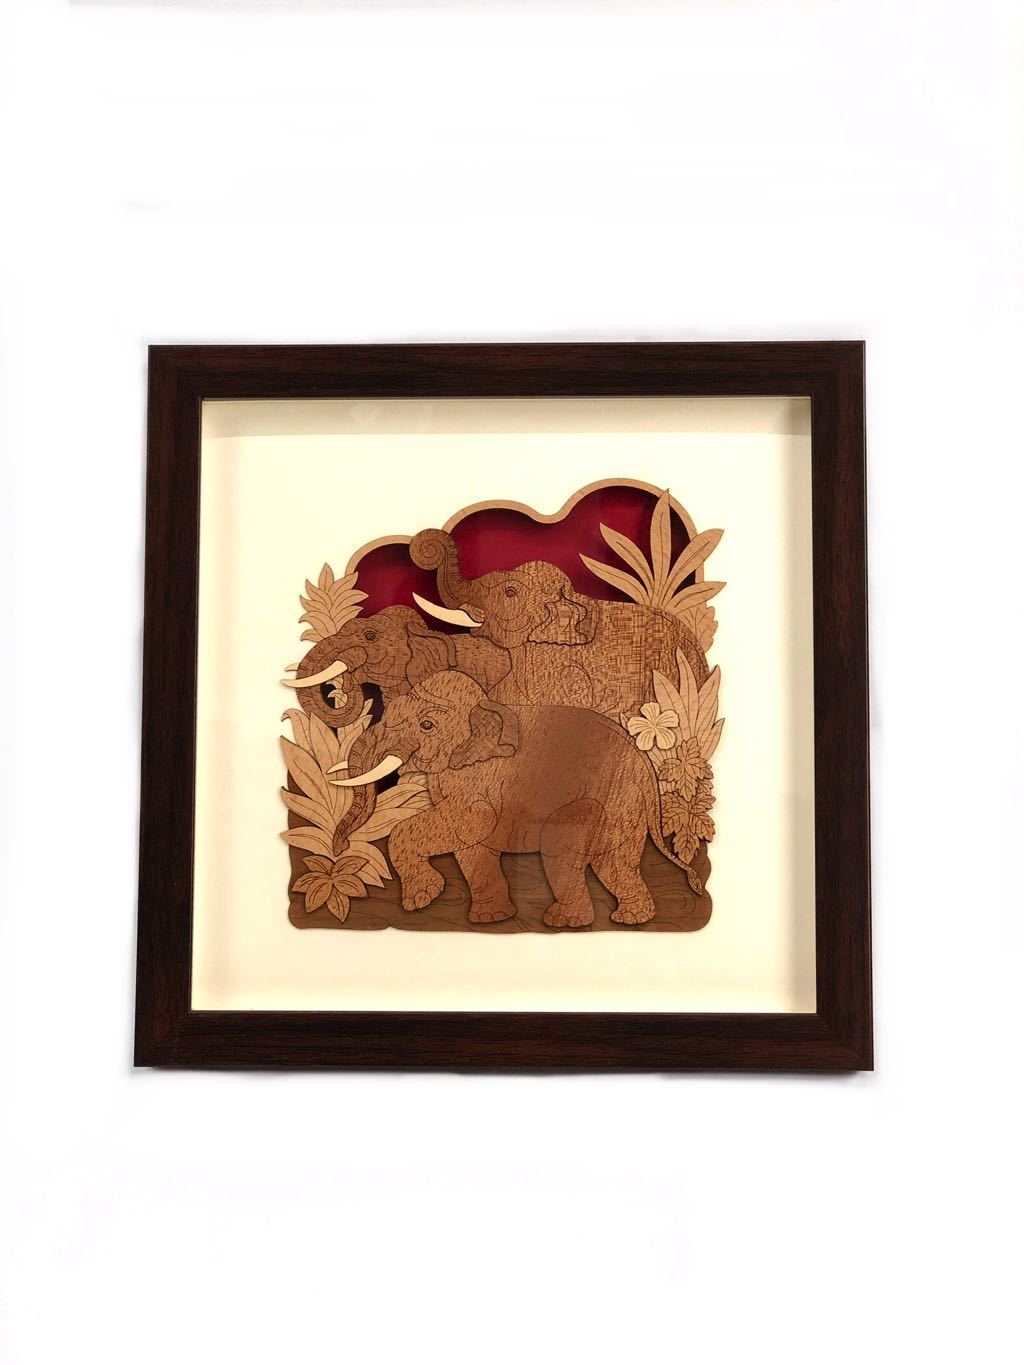 Unique Creation Of Elephant On Wood Unusual Expertise Crafts Frames By Tamrapatra